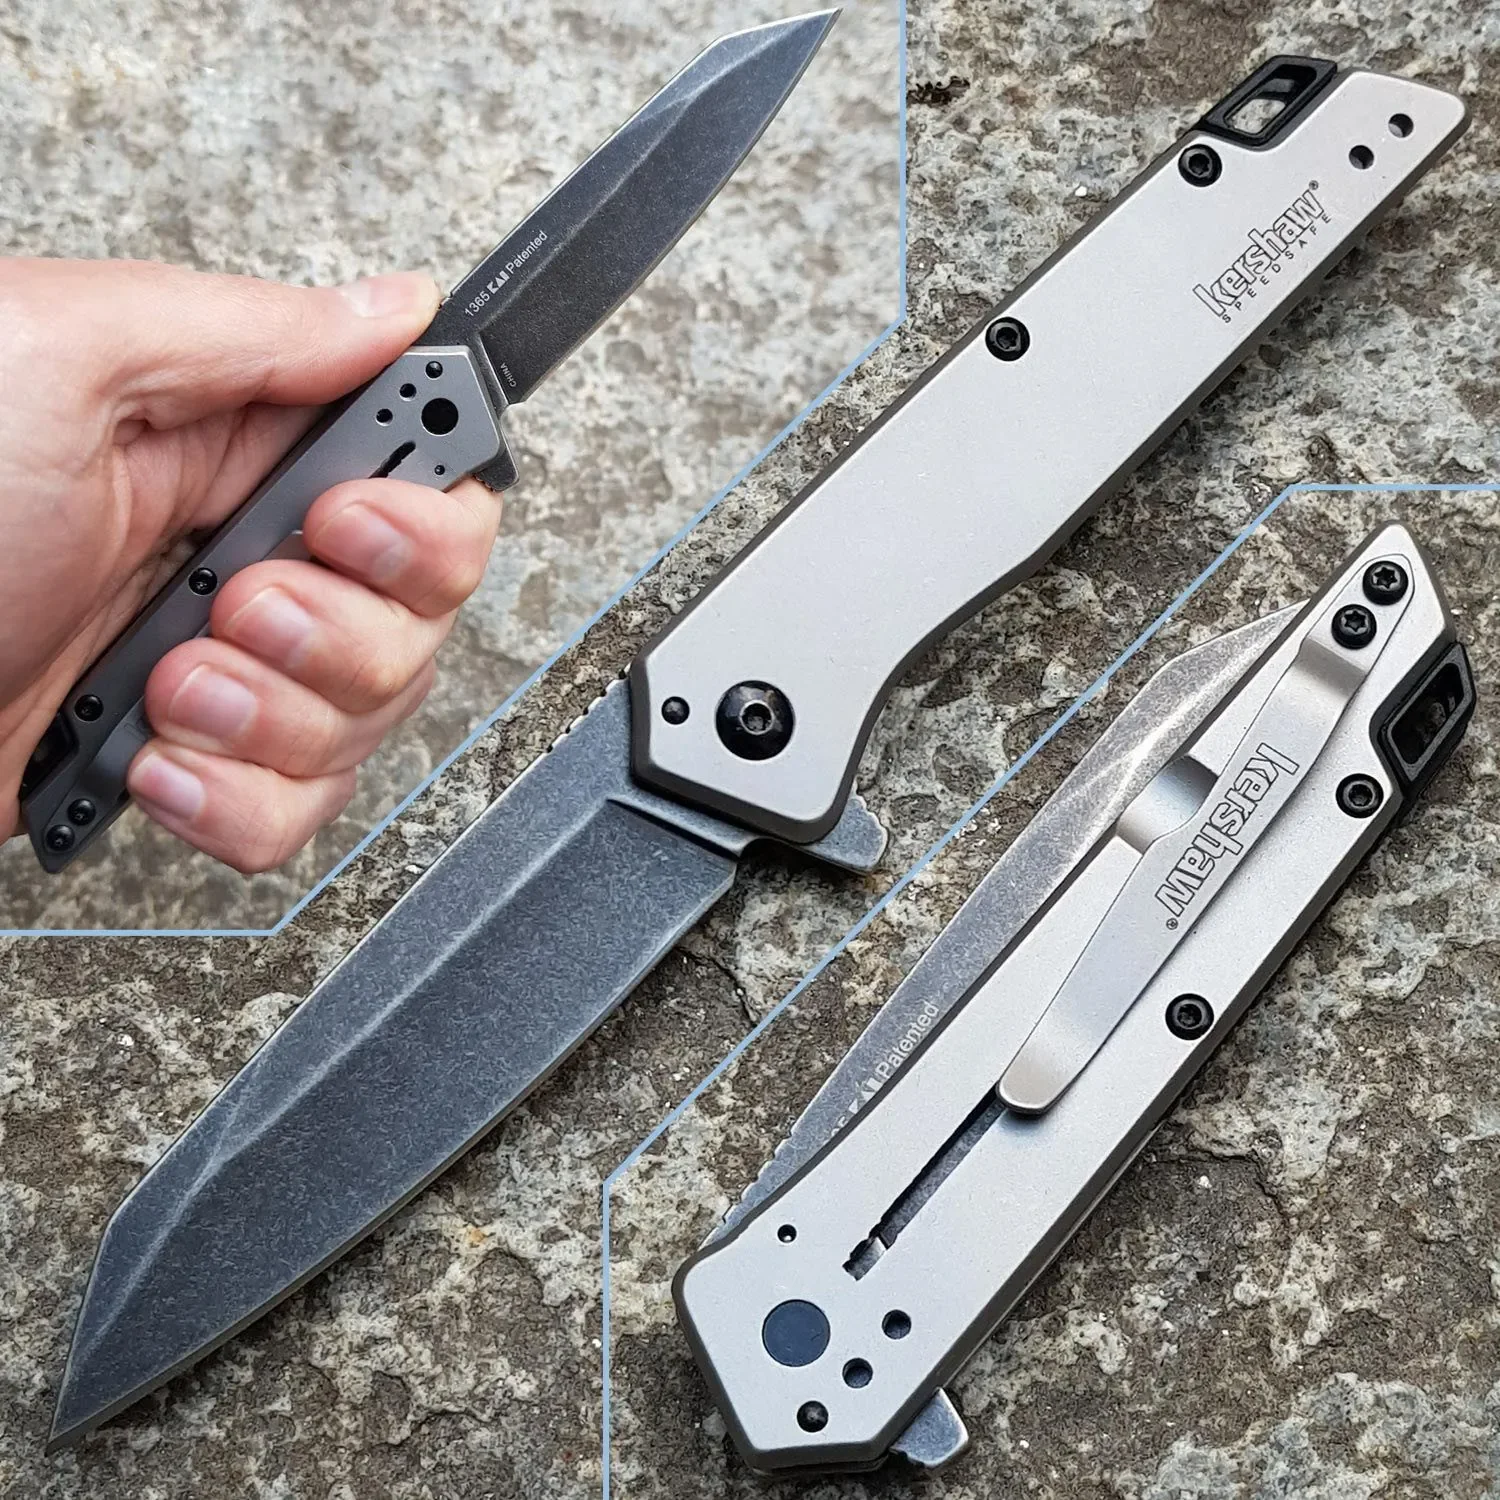 

Kershaw Misdirect 1365 Assisted Folding Pocket Knife 8Cr13Mov Blade Aluminium Alloy Handle Outdoor Tactical Survival EDC Knives